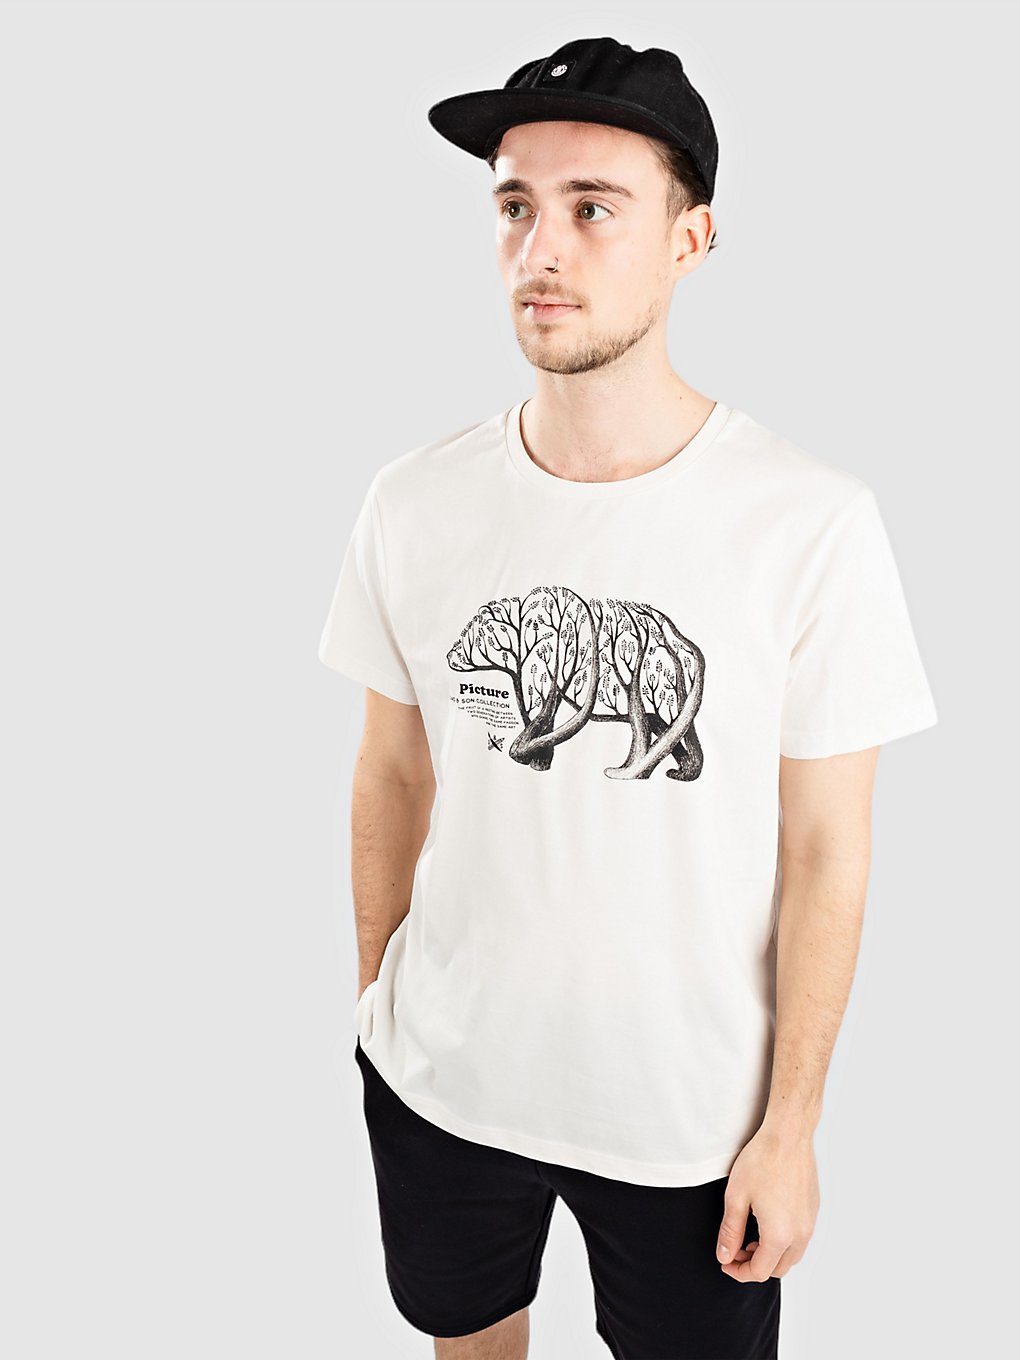 Picture D&S Bearbranch T-Shirt